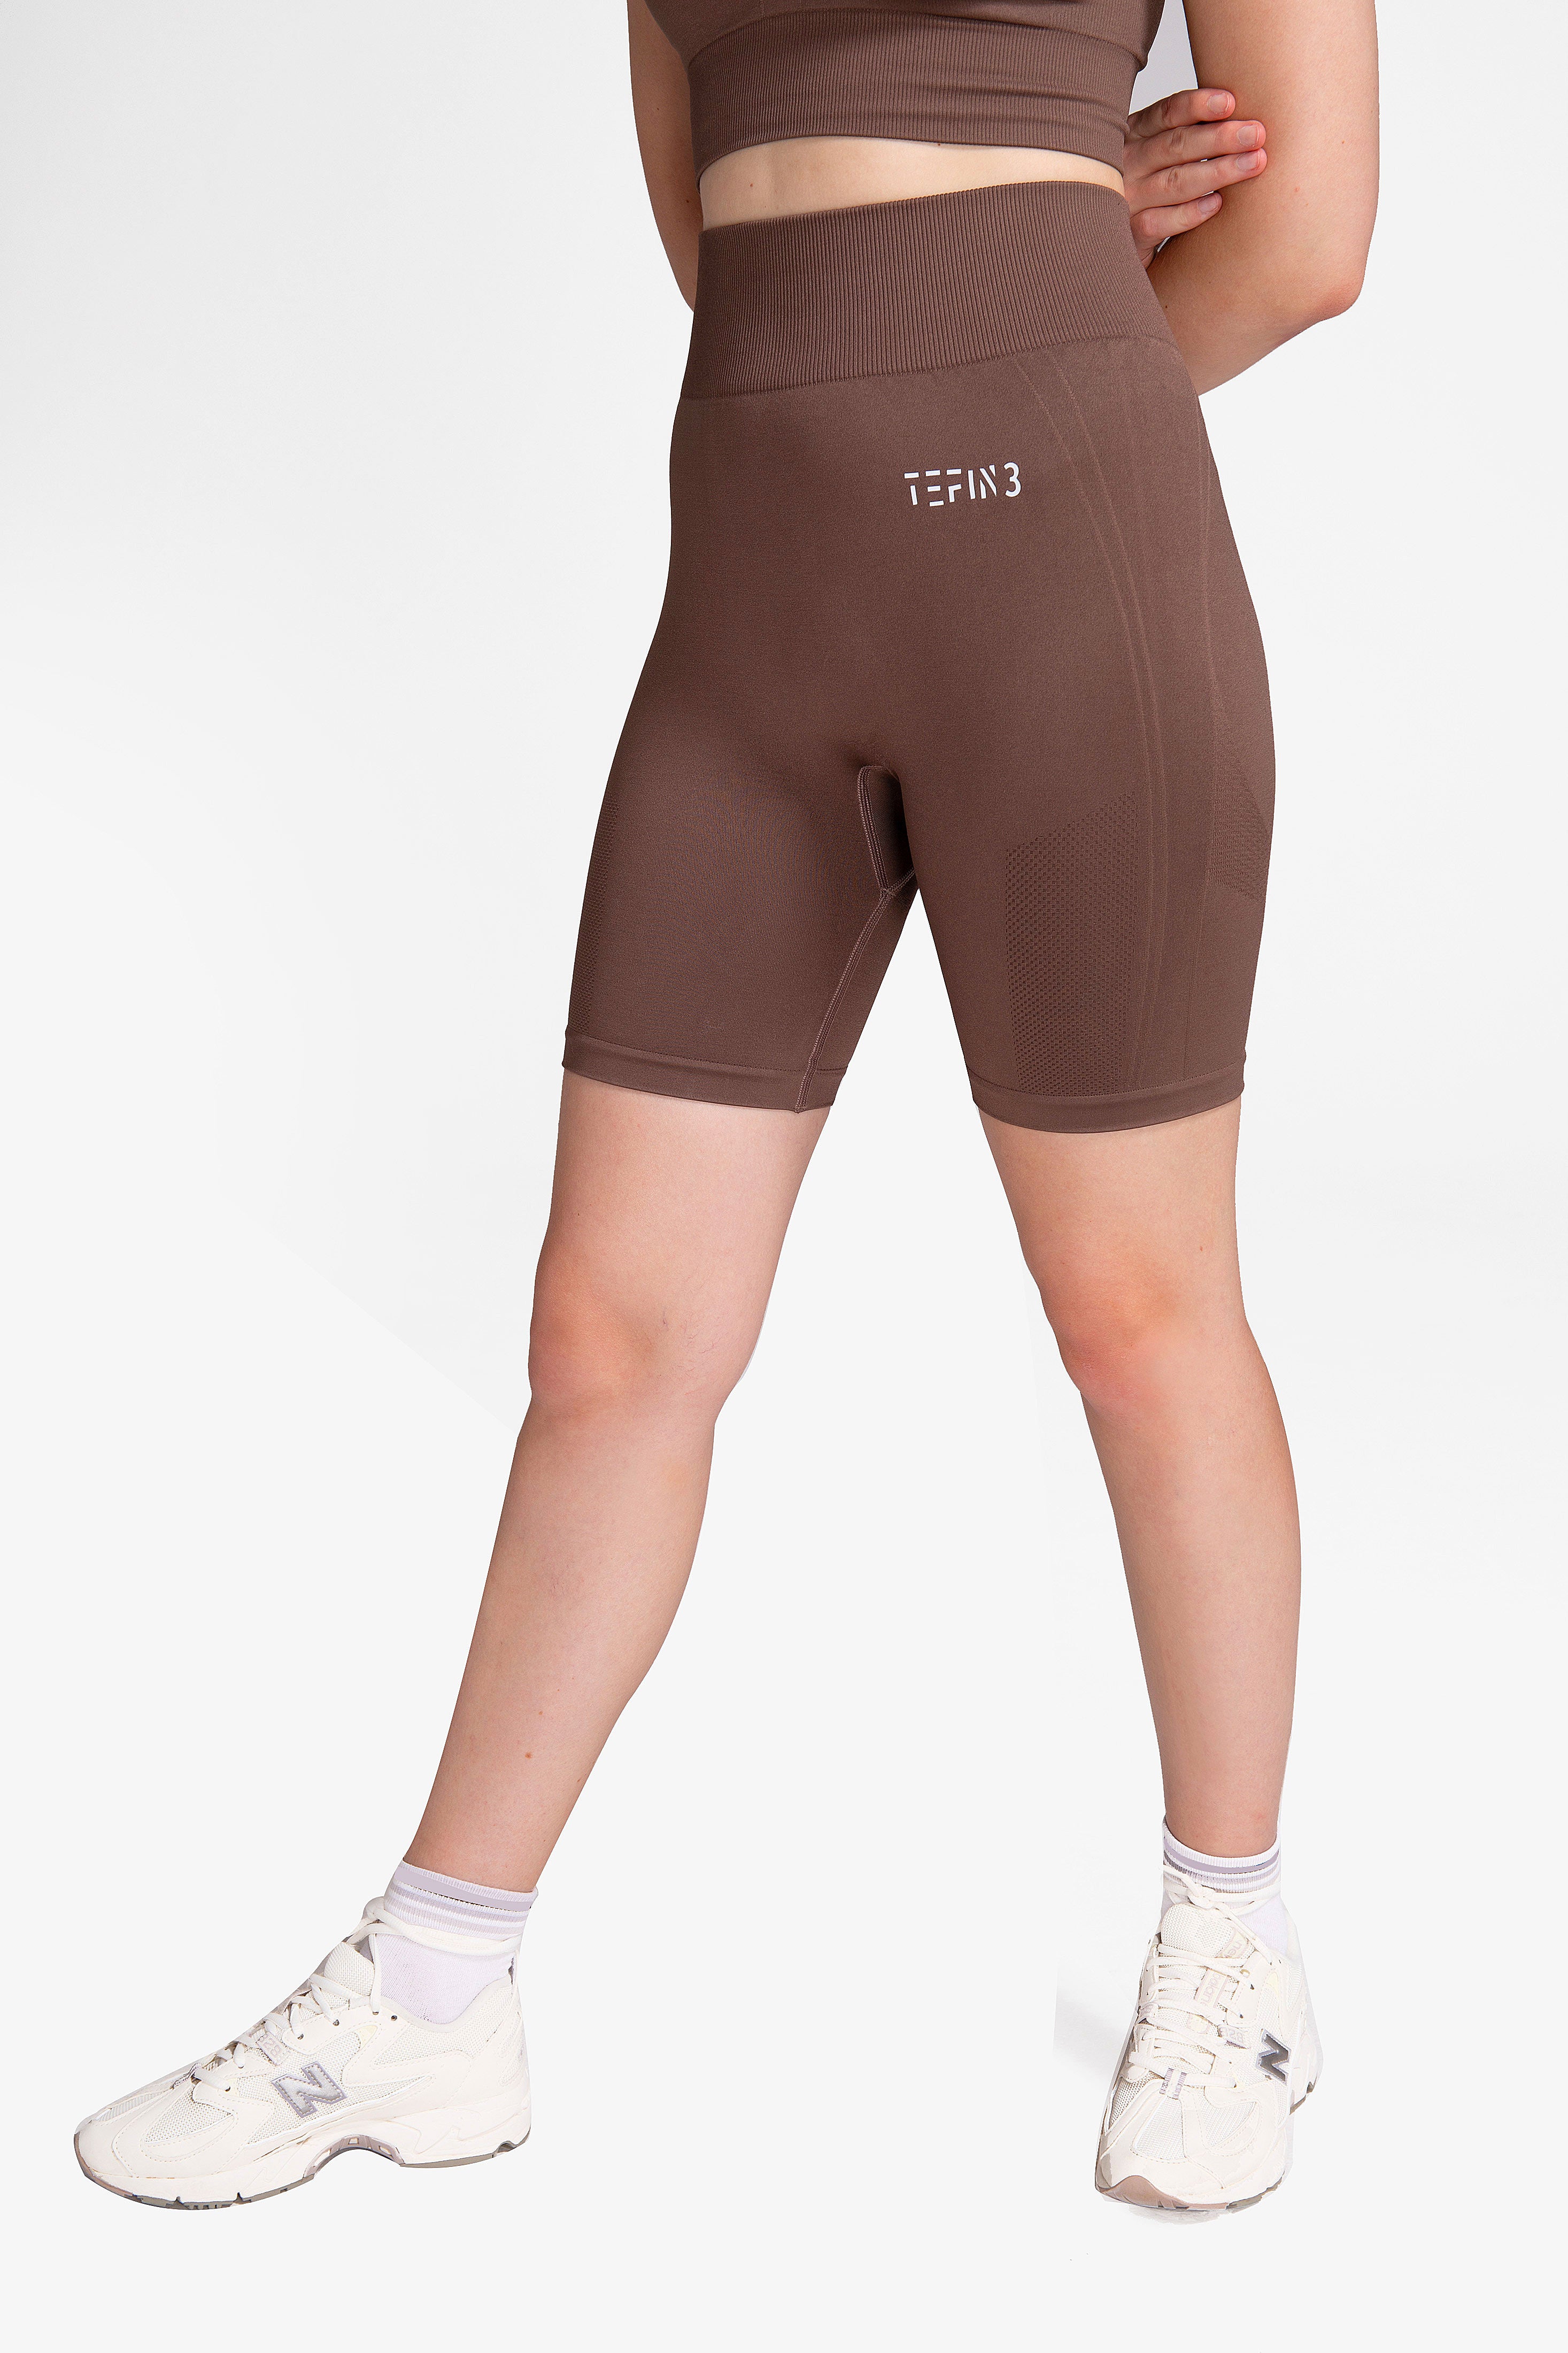 Comfy Seamless Workout Shorts Chocolate Brown